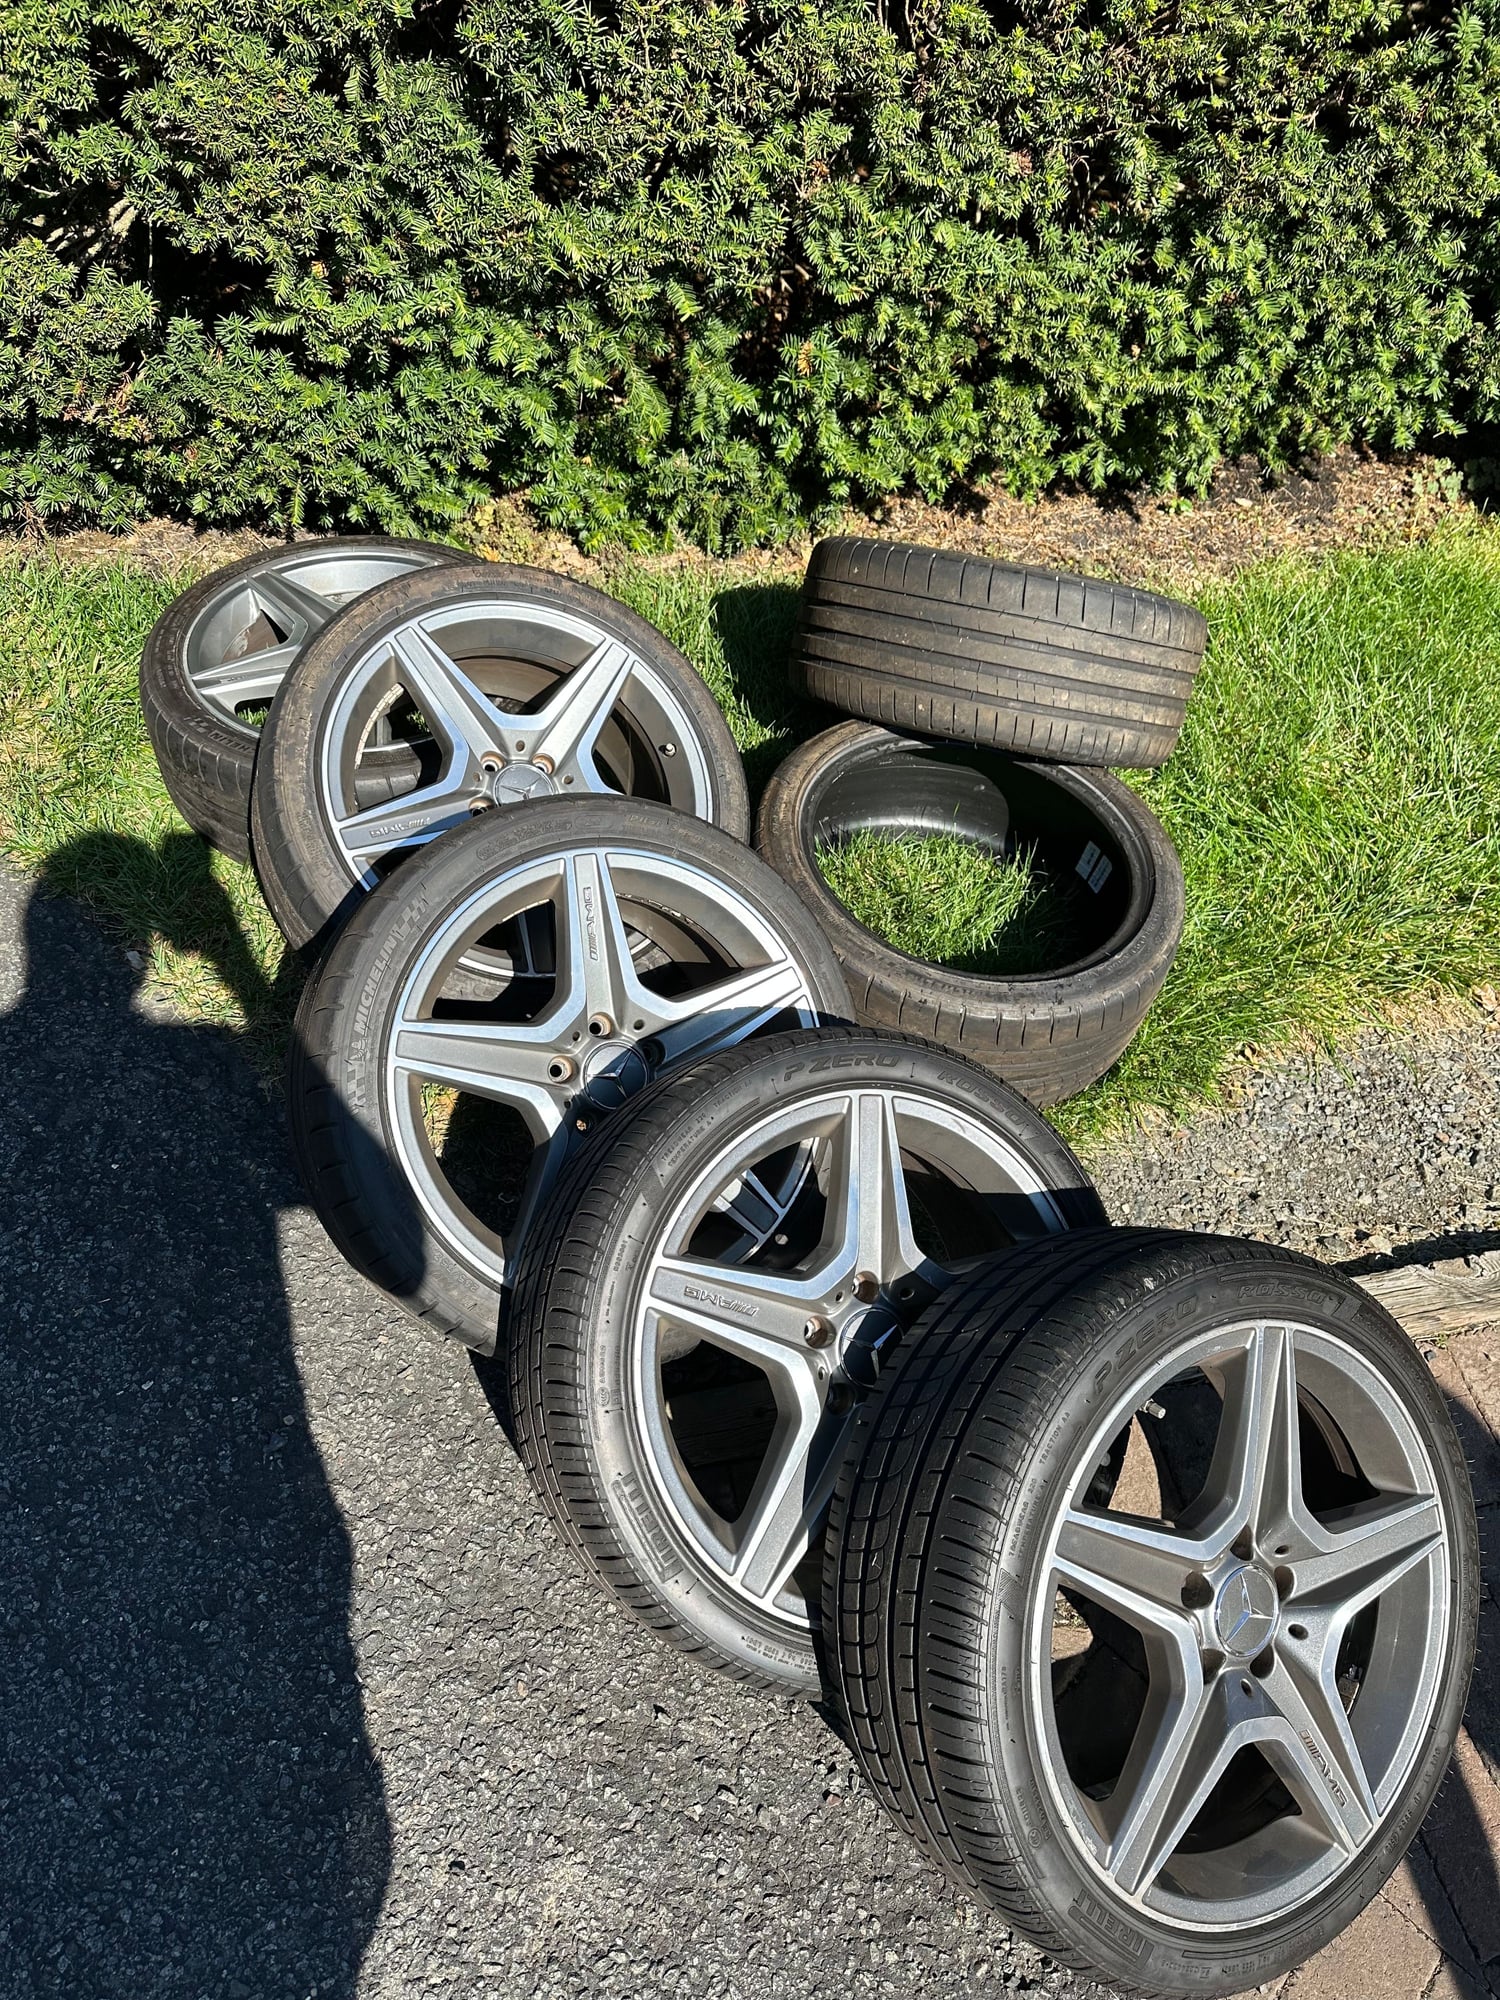 2012 Mercedes-Benz C63 AMG - W204 C63 PART OUT: Trans, Open Diff, 18” AMG wheels, Steering Wheel Bezels Etc - Ewing, NJ 08628, United States